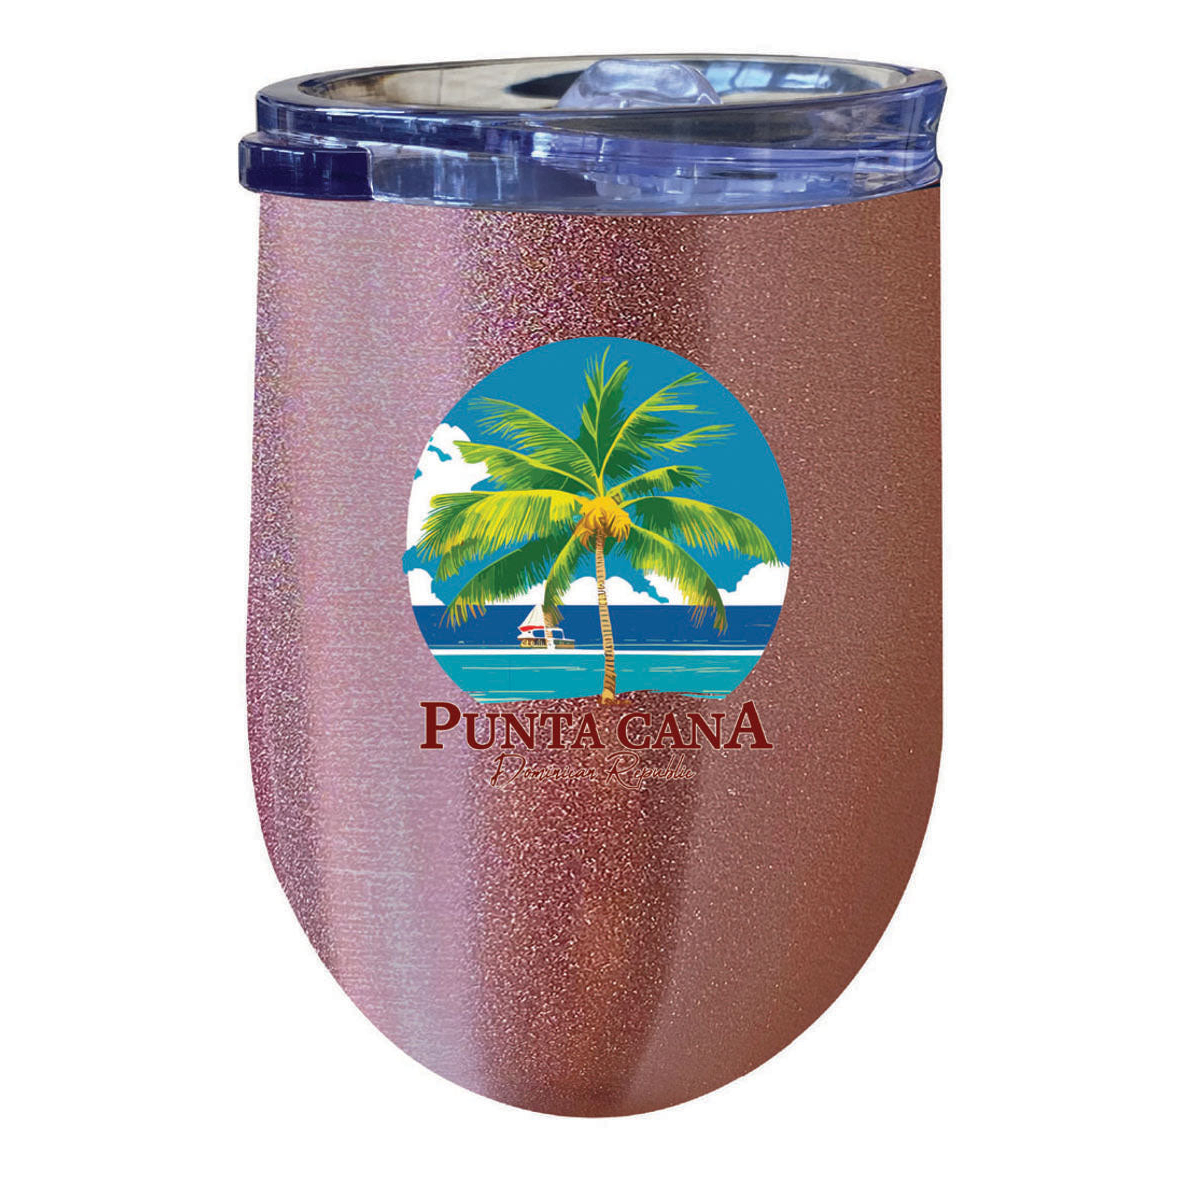 Punta Cana Dominican Republic Souvenir 12 Oz Insulated Wine Stainless Steel Tumbler - Coral, PARROT B